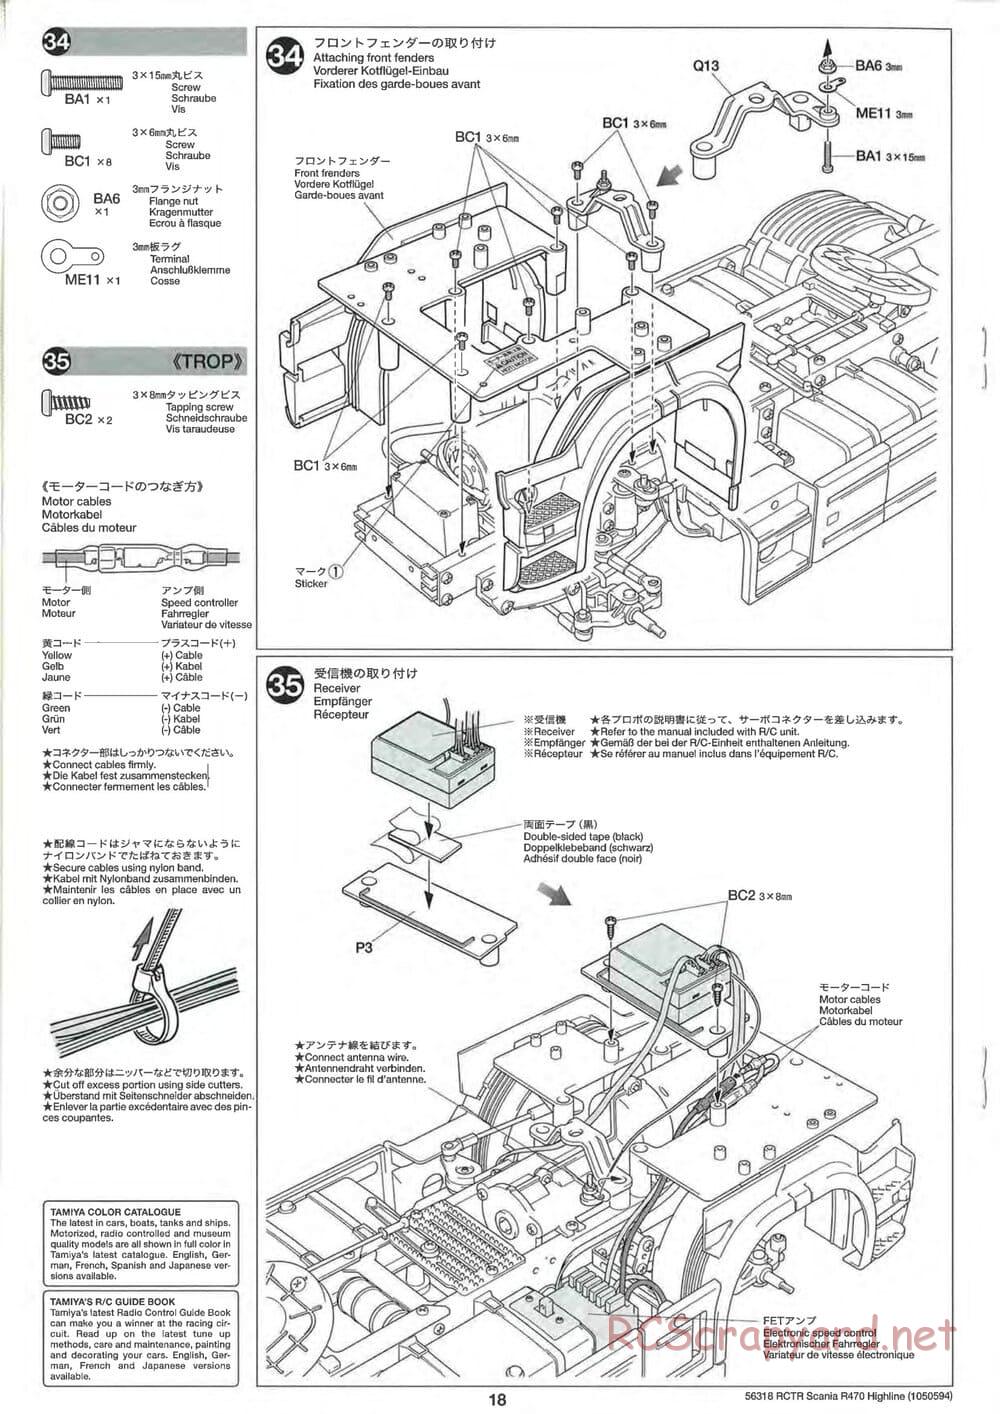 Tamiya - Scania R470 Highline Tractor Truck Chassis - Manual - Page 18